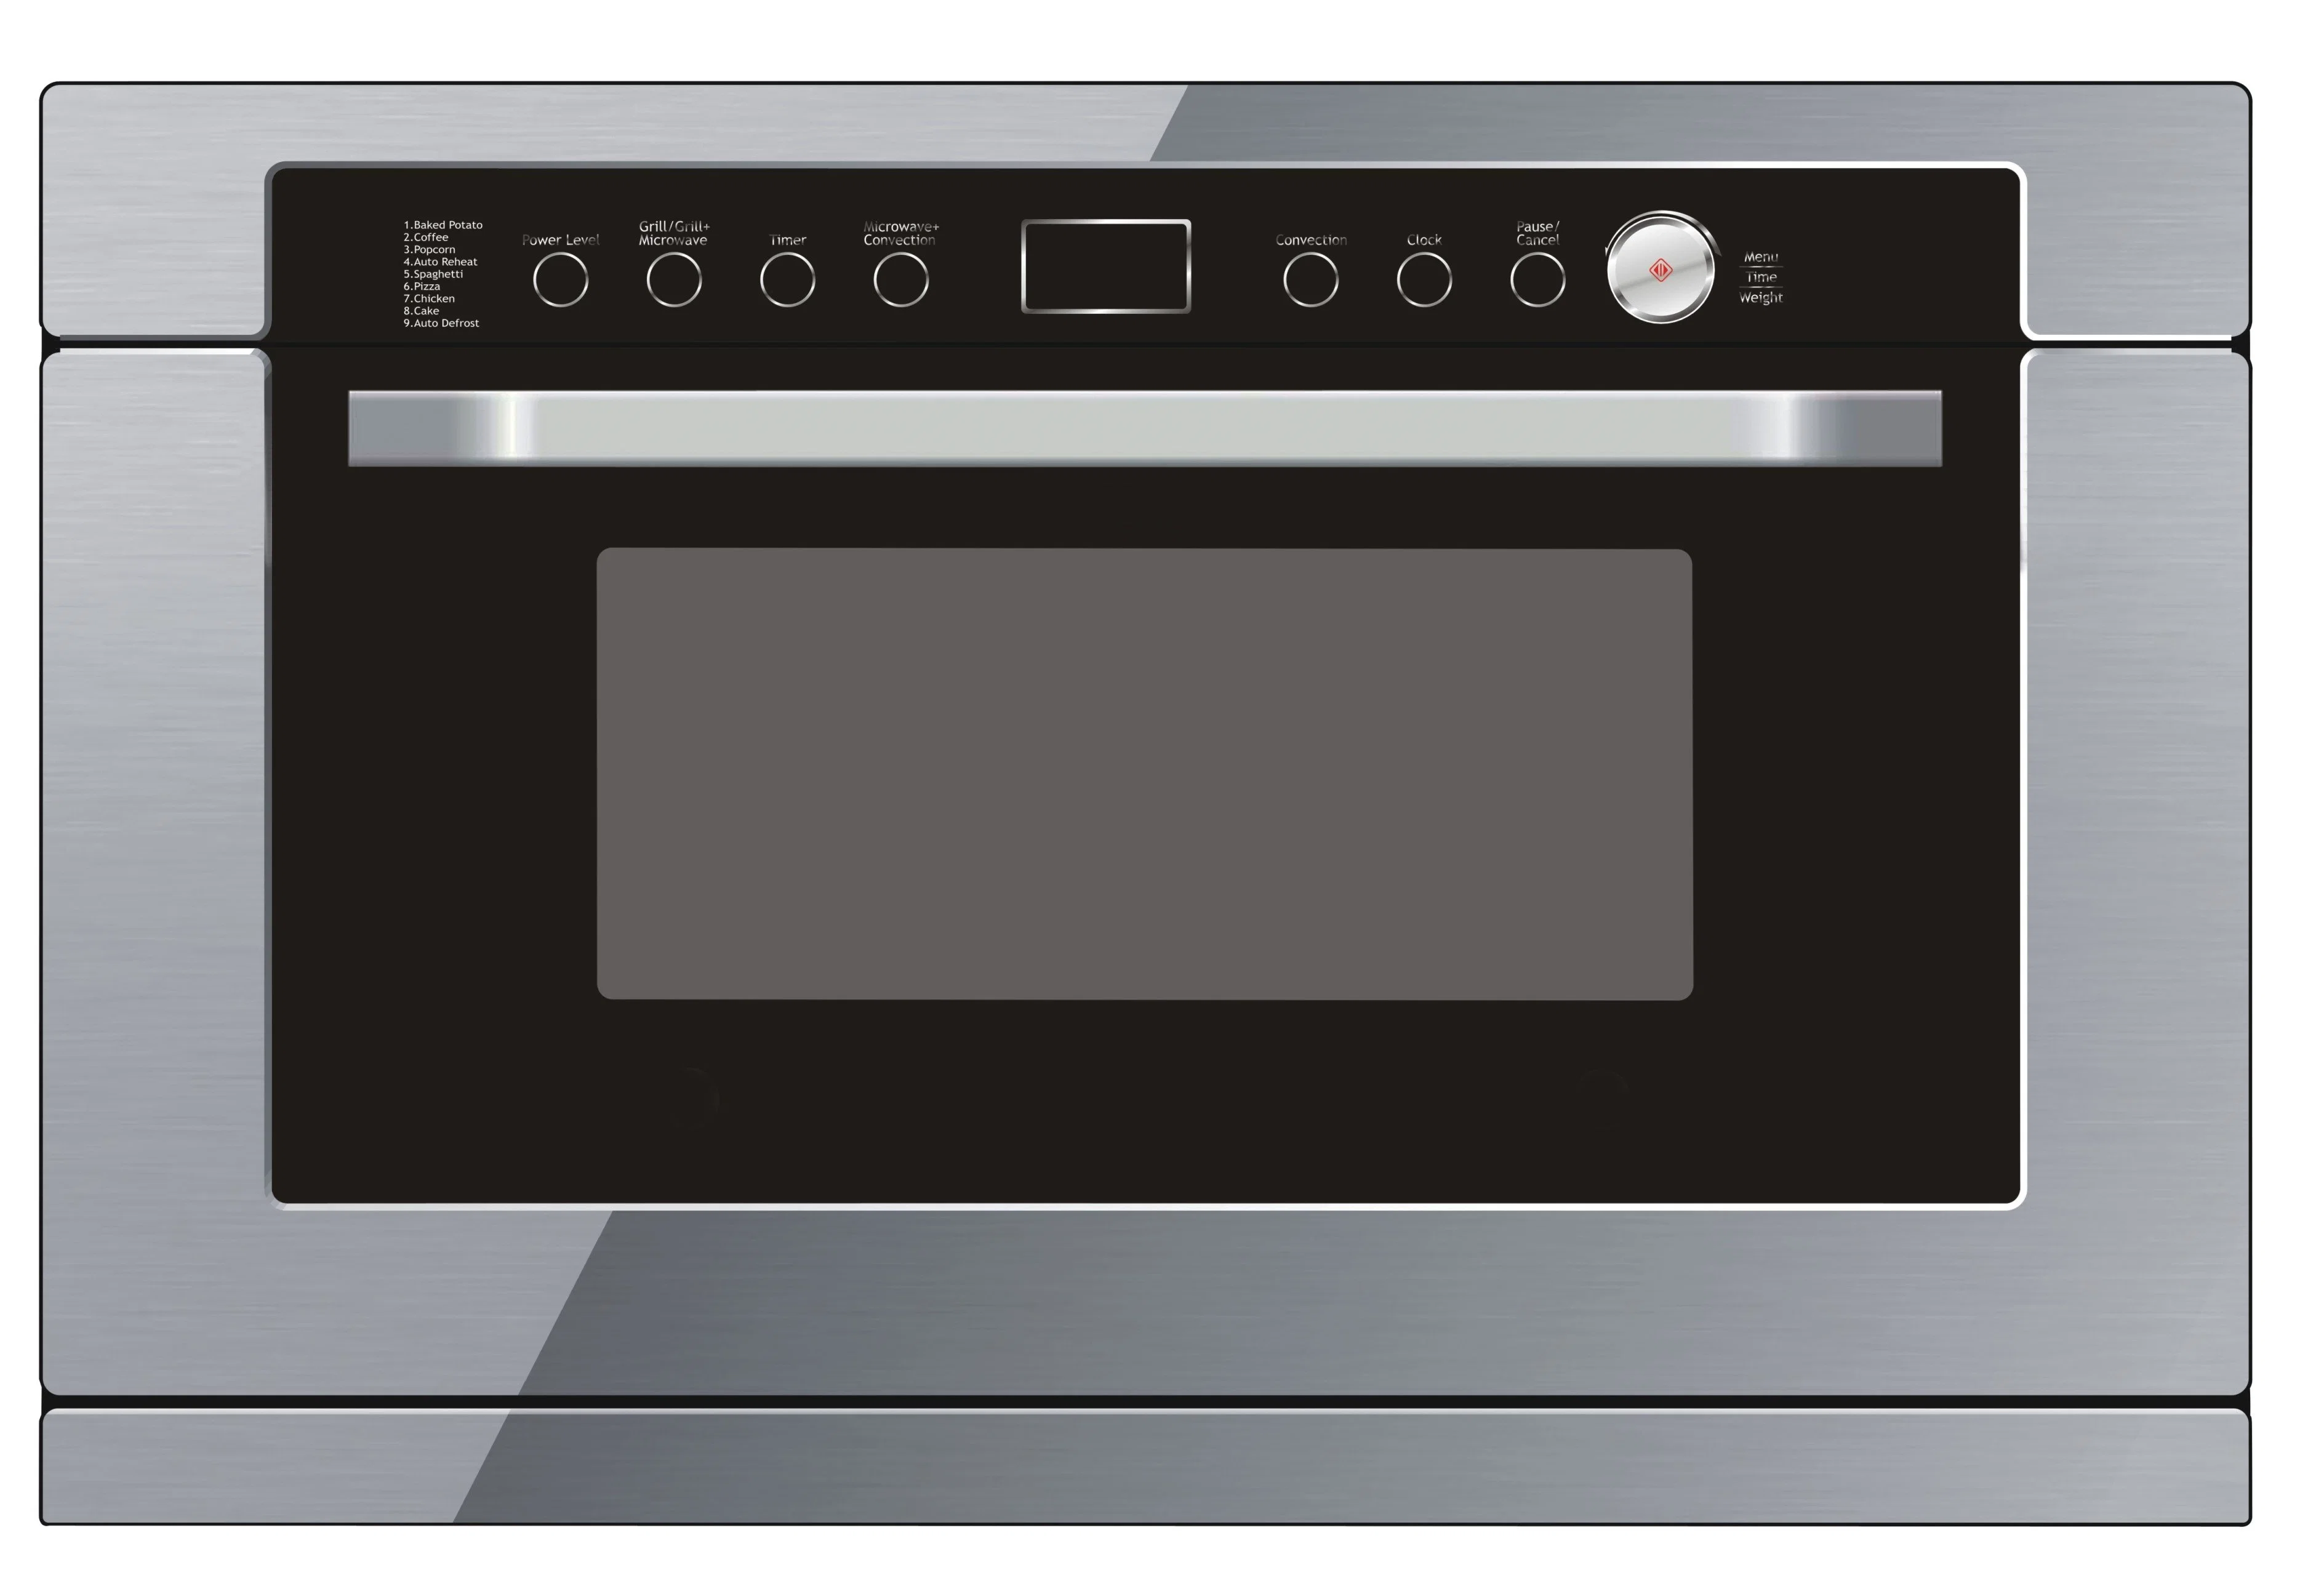 China Manufacturers Appliances Kitchen Big 34L 38L 43L 60L Convection Modern Electric Digital Stainless Steel Defrost Microwave Oven with Grill Option